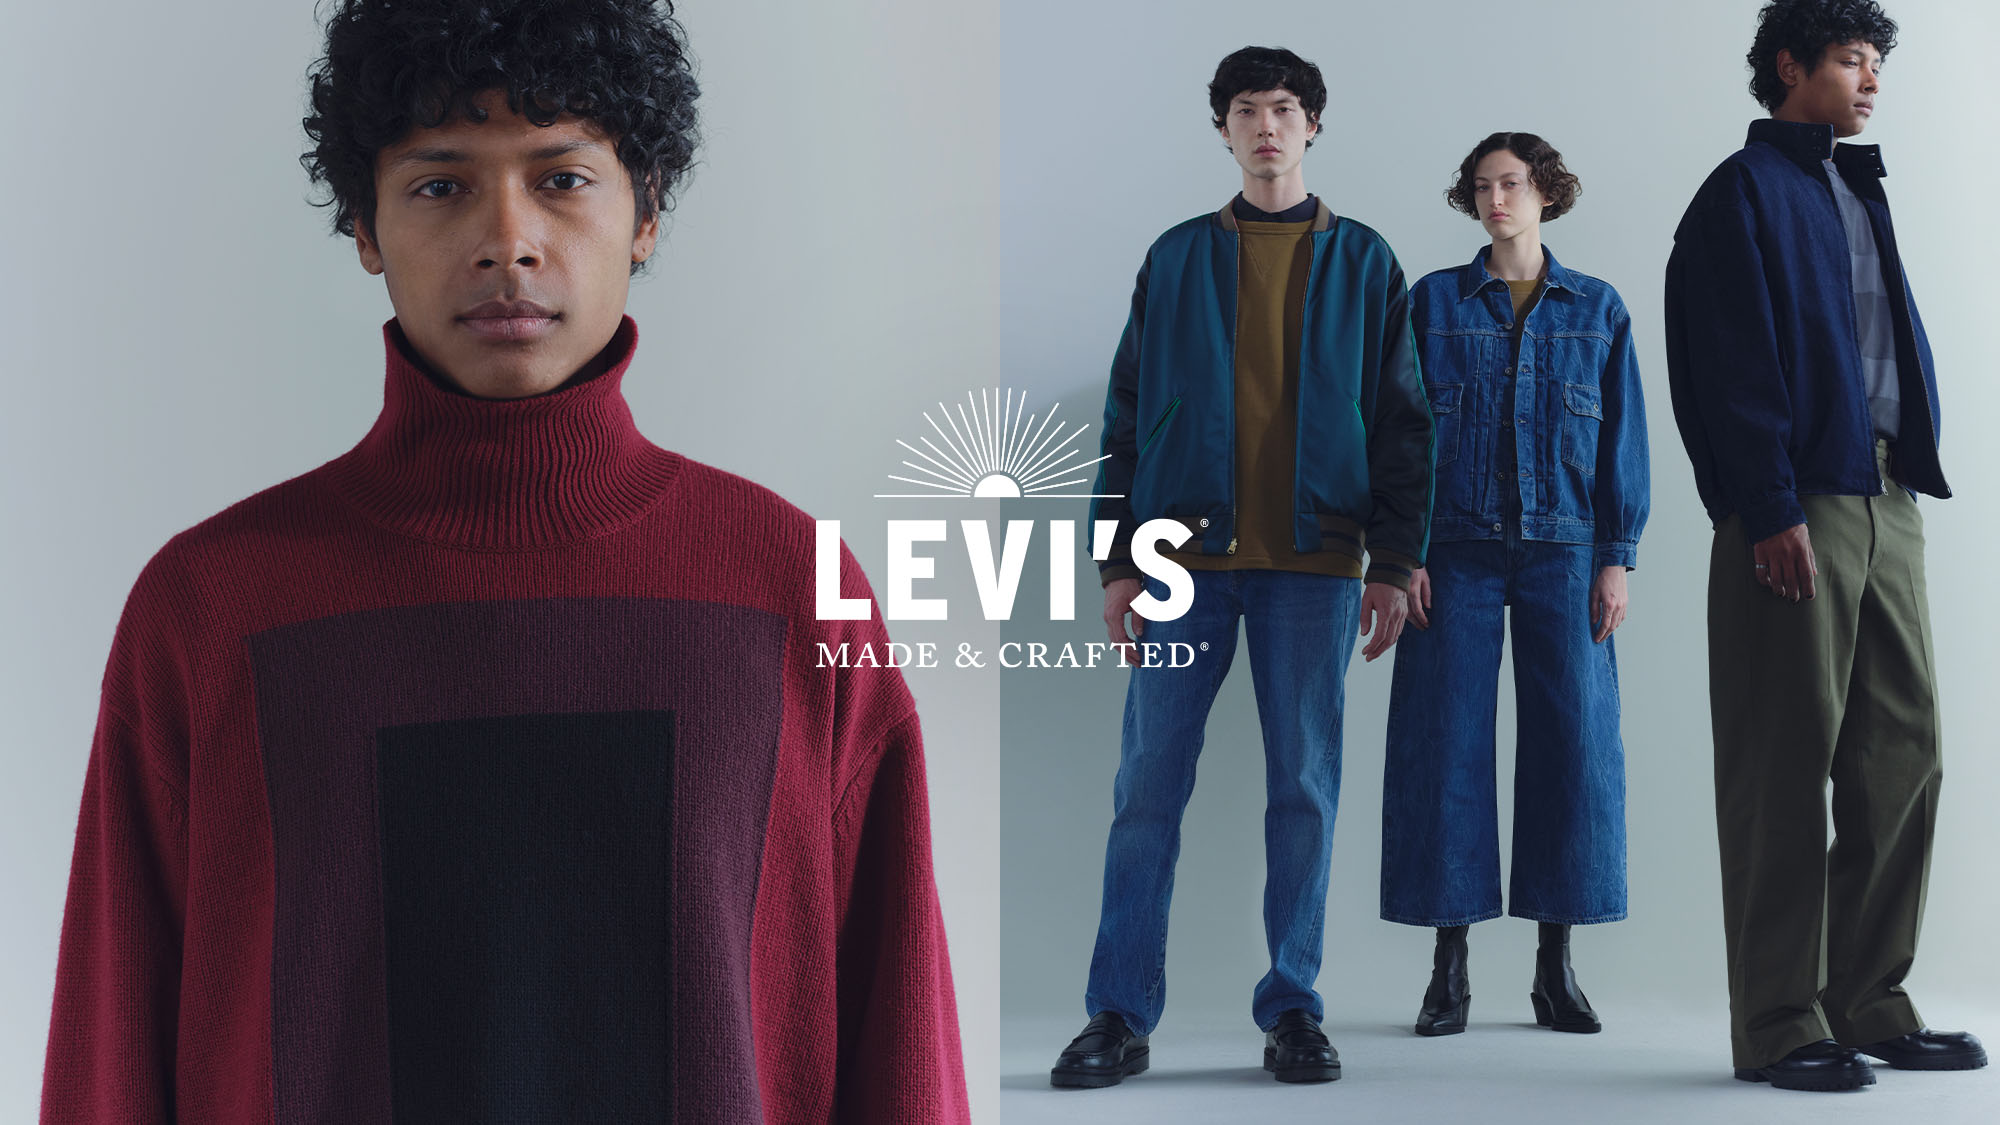 Boys And Girls Styled In Levi's Made & Crafted Collection Outfits - Levi's Hong Kong 